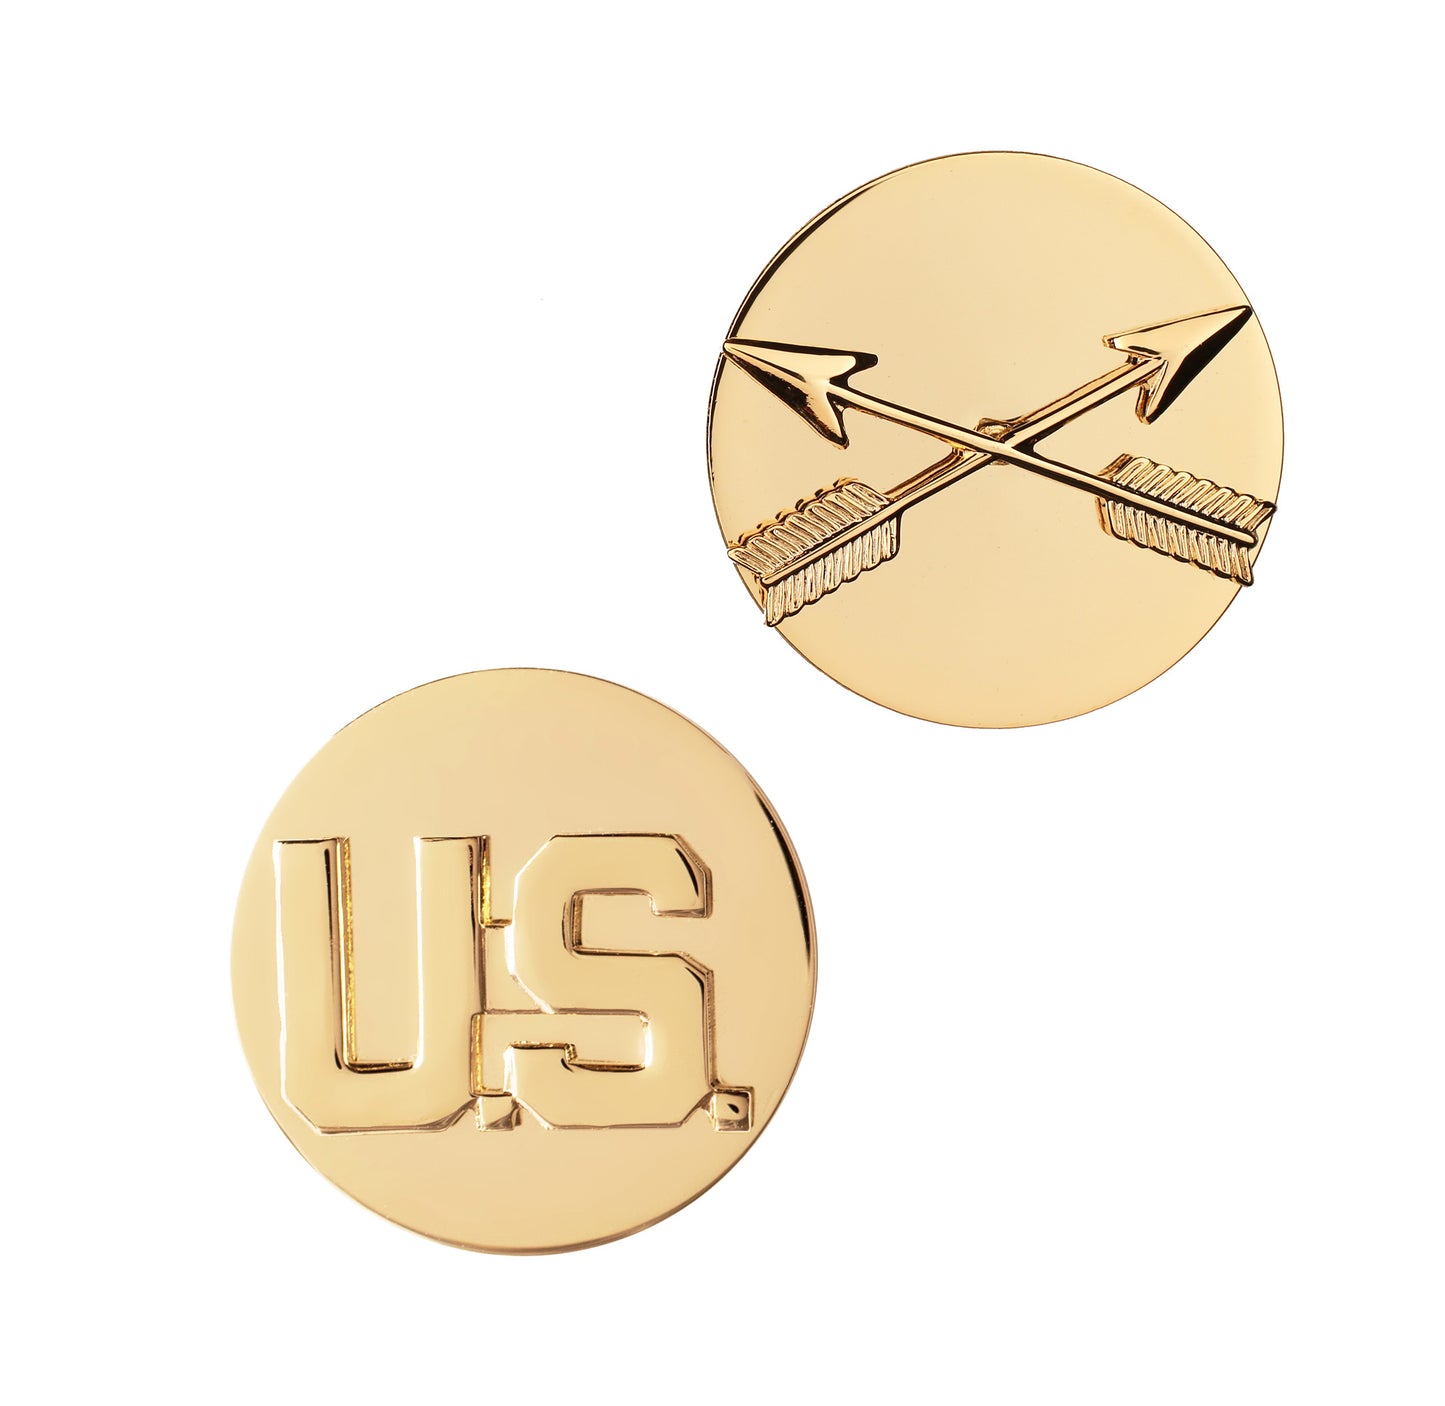 U.S. Army Enlisted Special Forces & U.S. STA-BRITE® Pin-on